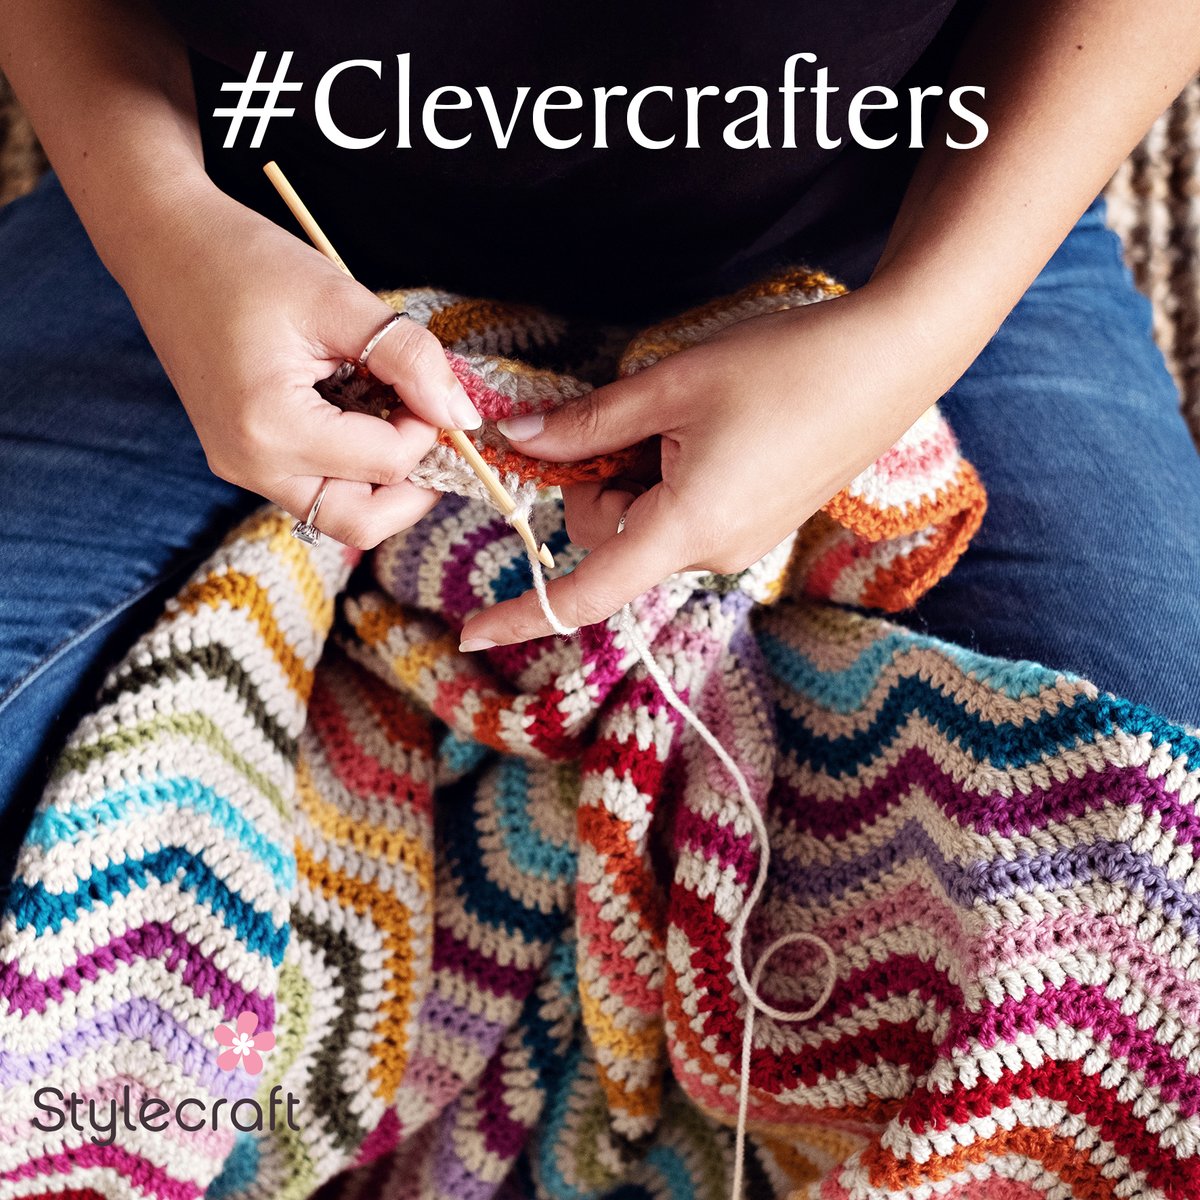 What have you fabulous #clevercrafters got to show us today?⁣⁣⁣⁣⁣⁣⁣ We'd love to see your latest finished crochet and knitting projects so we can share some tomorrow. Post a pic and tell us about your project.⁣⁣⁣⁣⁣⁣⁣⁣⁣⁣⁣⁣⁣⁣ Pictured - free pattern FO74